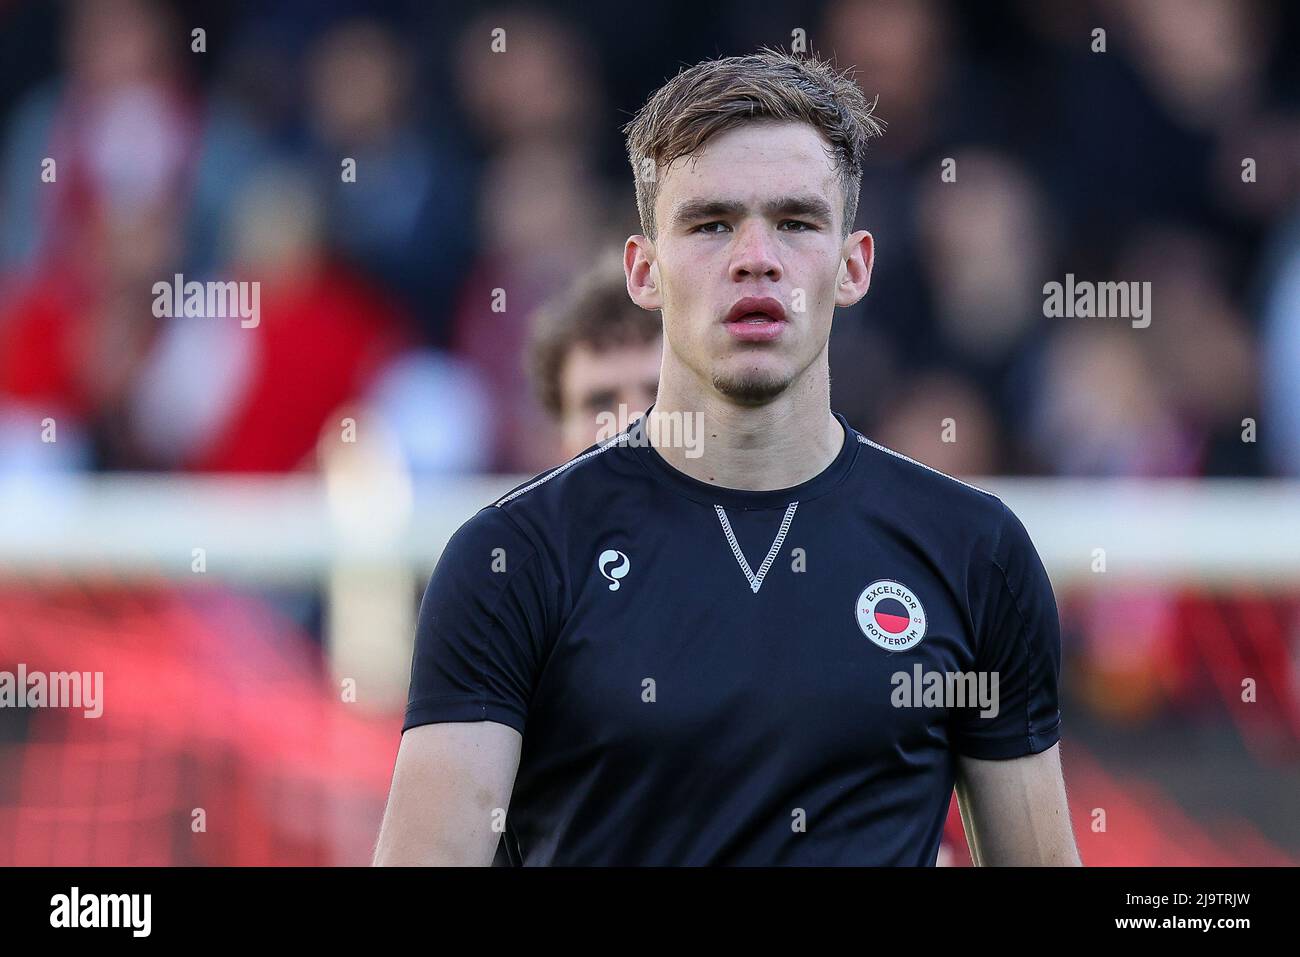 ROTTERDAM, NETHERLANDS - MAY 24: Thijs Dallinga of Excelsior during the Dutch Keukenkampioendivisie Playoffs Final - First Leg match between Excelsior Rotterdam and ADO Den Haag at Van Donge & De Roo Stadion on May 24, 2022 in Rotterdam, Netherlands (Photo by Herman Dingler/Orange Pictures) Stock Photo